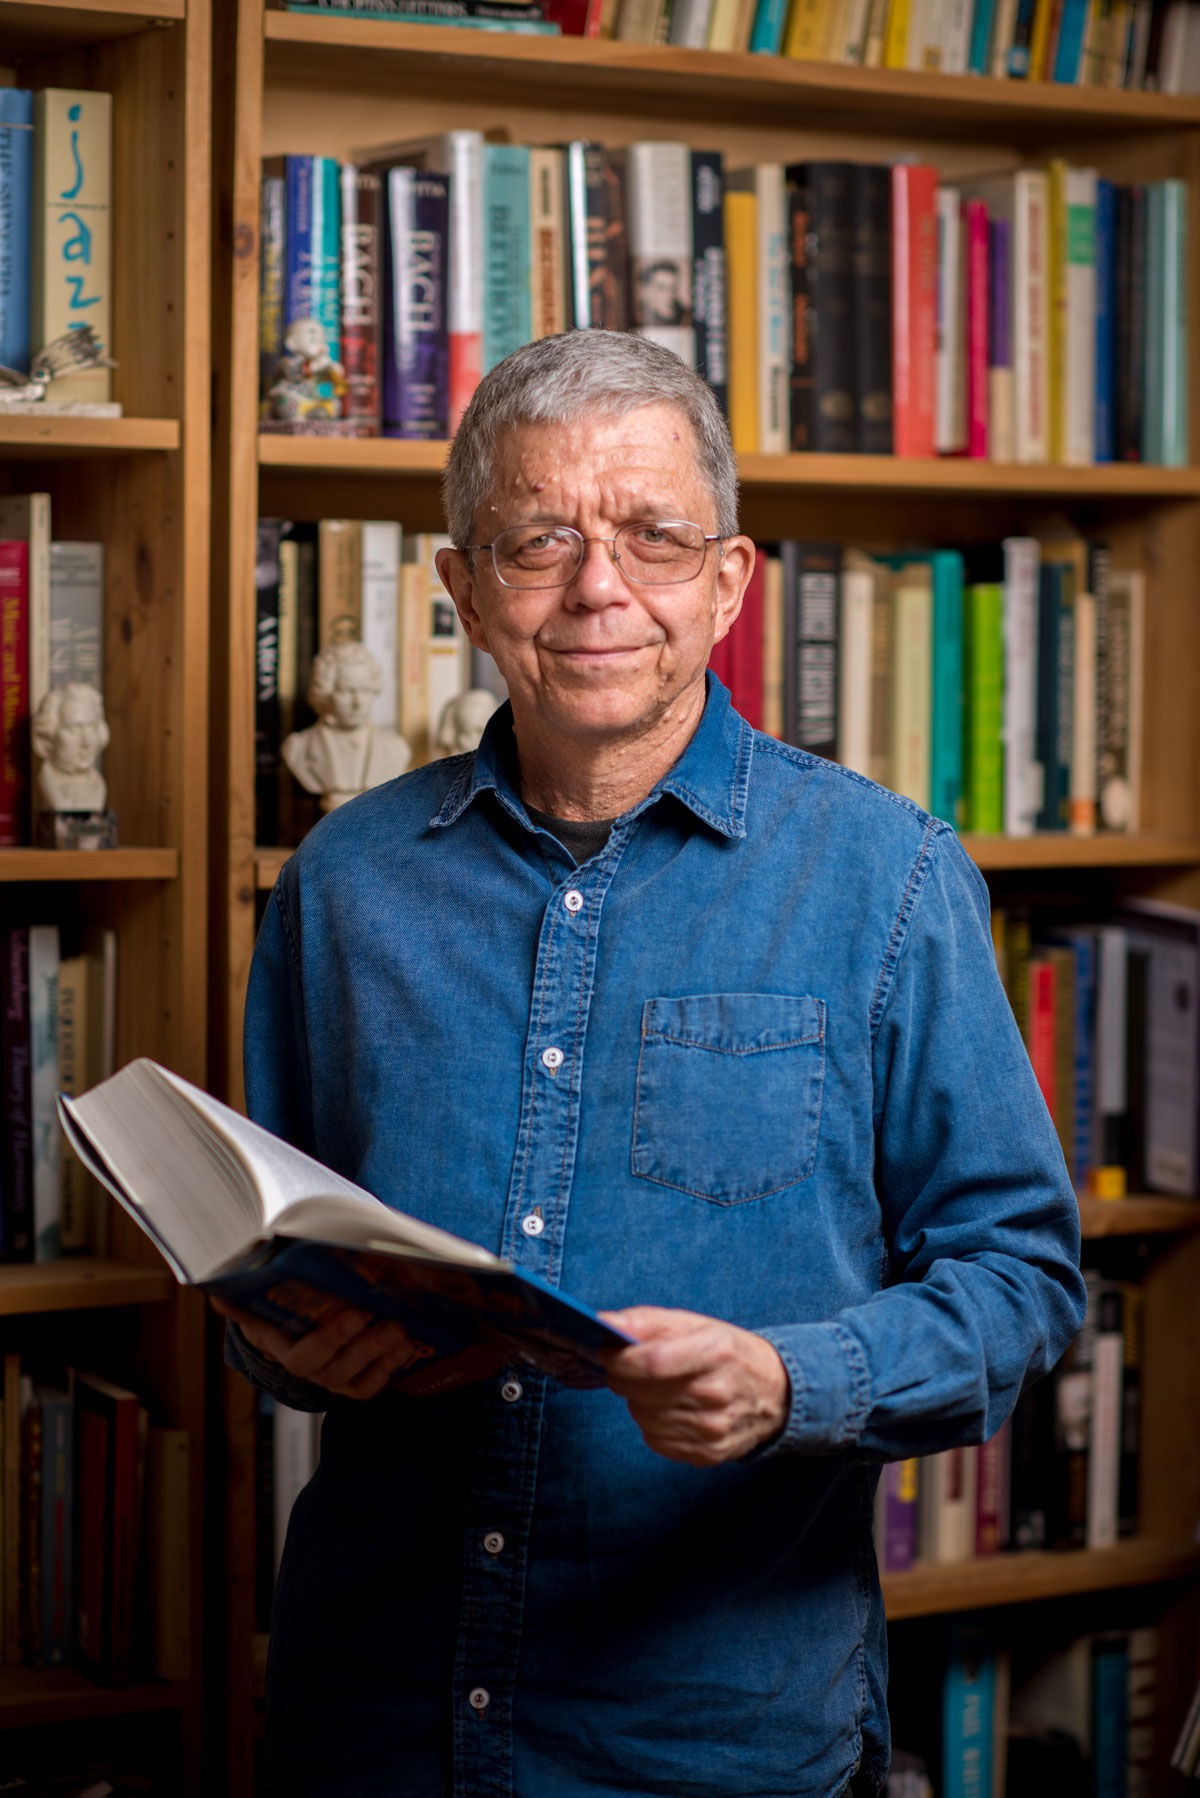 A man holding a book in front of a book shelf.